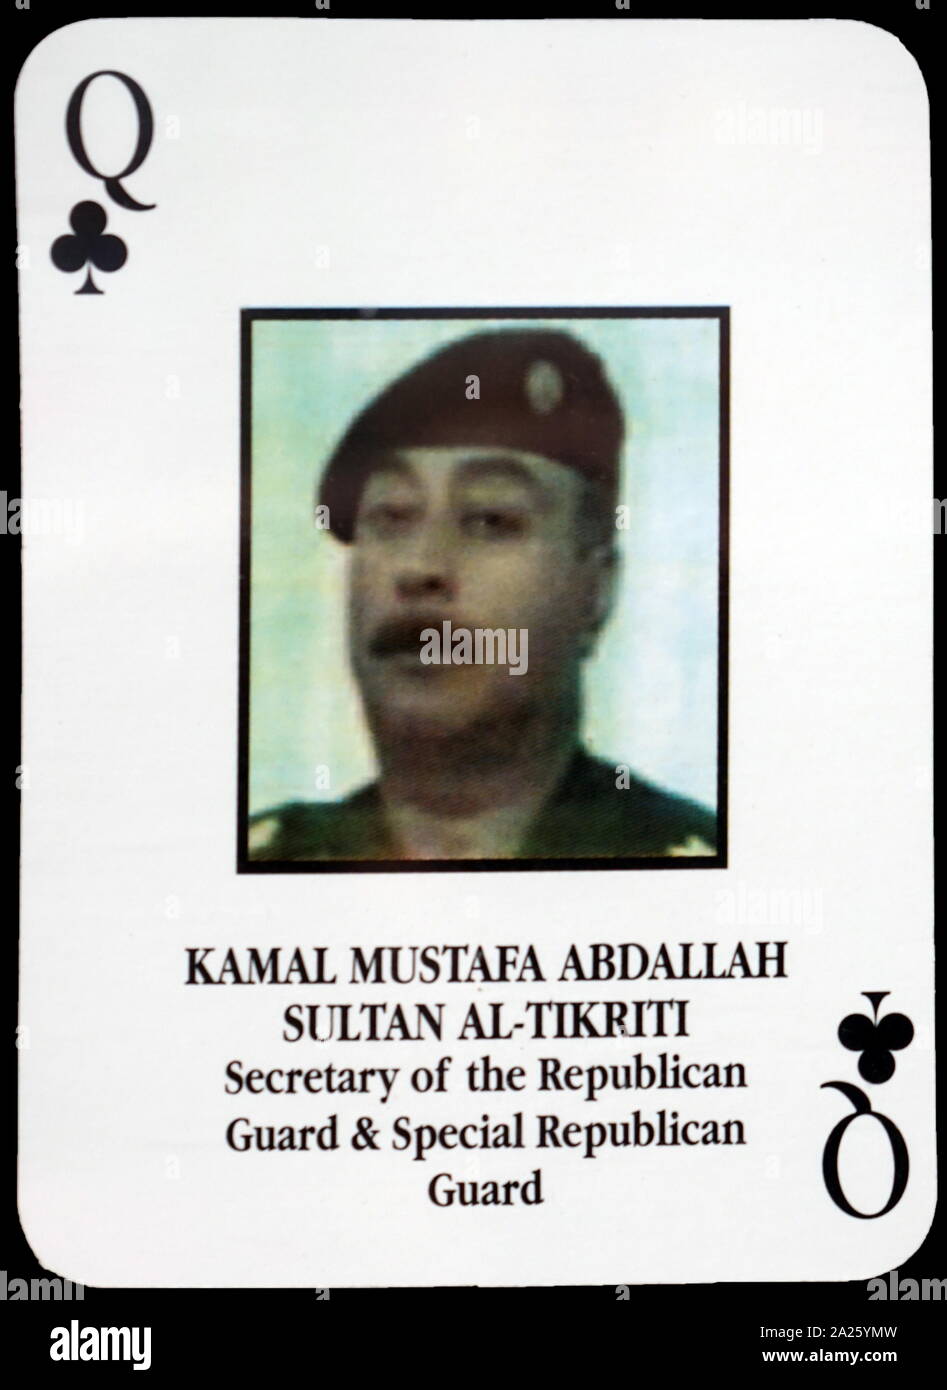 Most-wanted Iraqi playing cards - Kamal Mustafa Abdallah Sultan Al-Tikriti (Secretary of the Republican Guard & Special Republican Guard). The U.S. military developed a set of playing cards to help troop identify the most-wanted members of President Saddam Hussein's government during the 2003 invasion of Iraq. Stock Photo